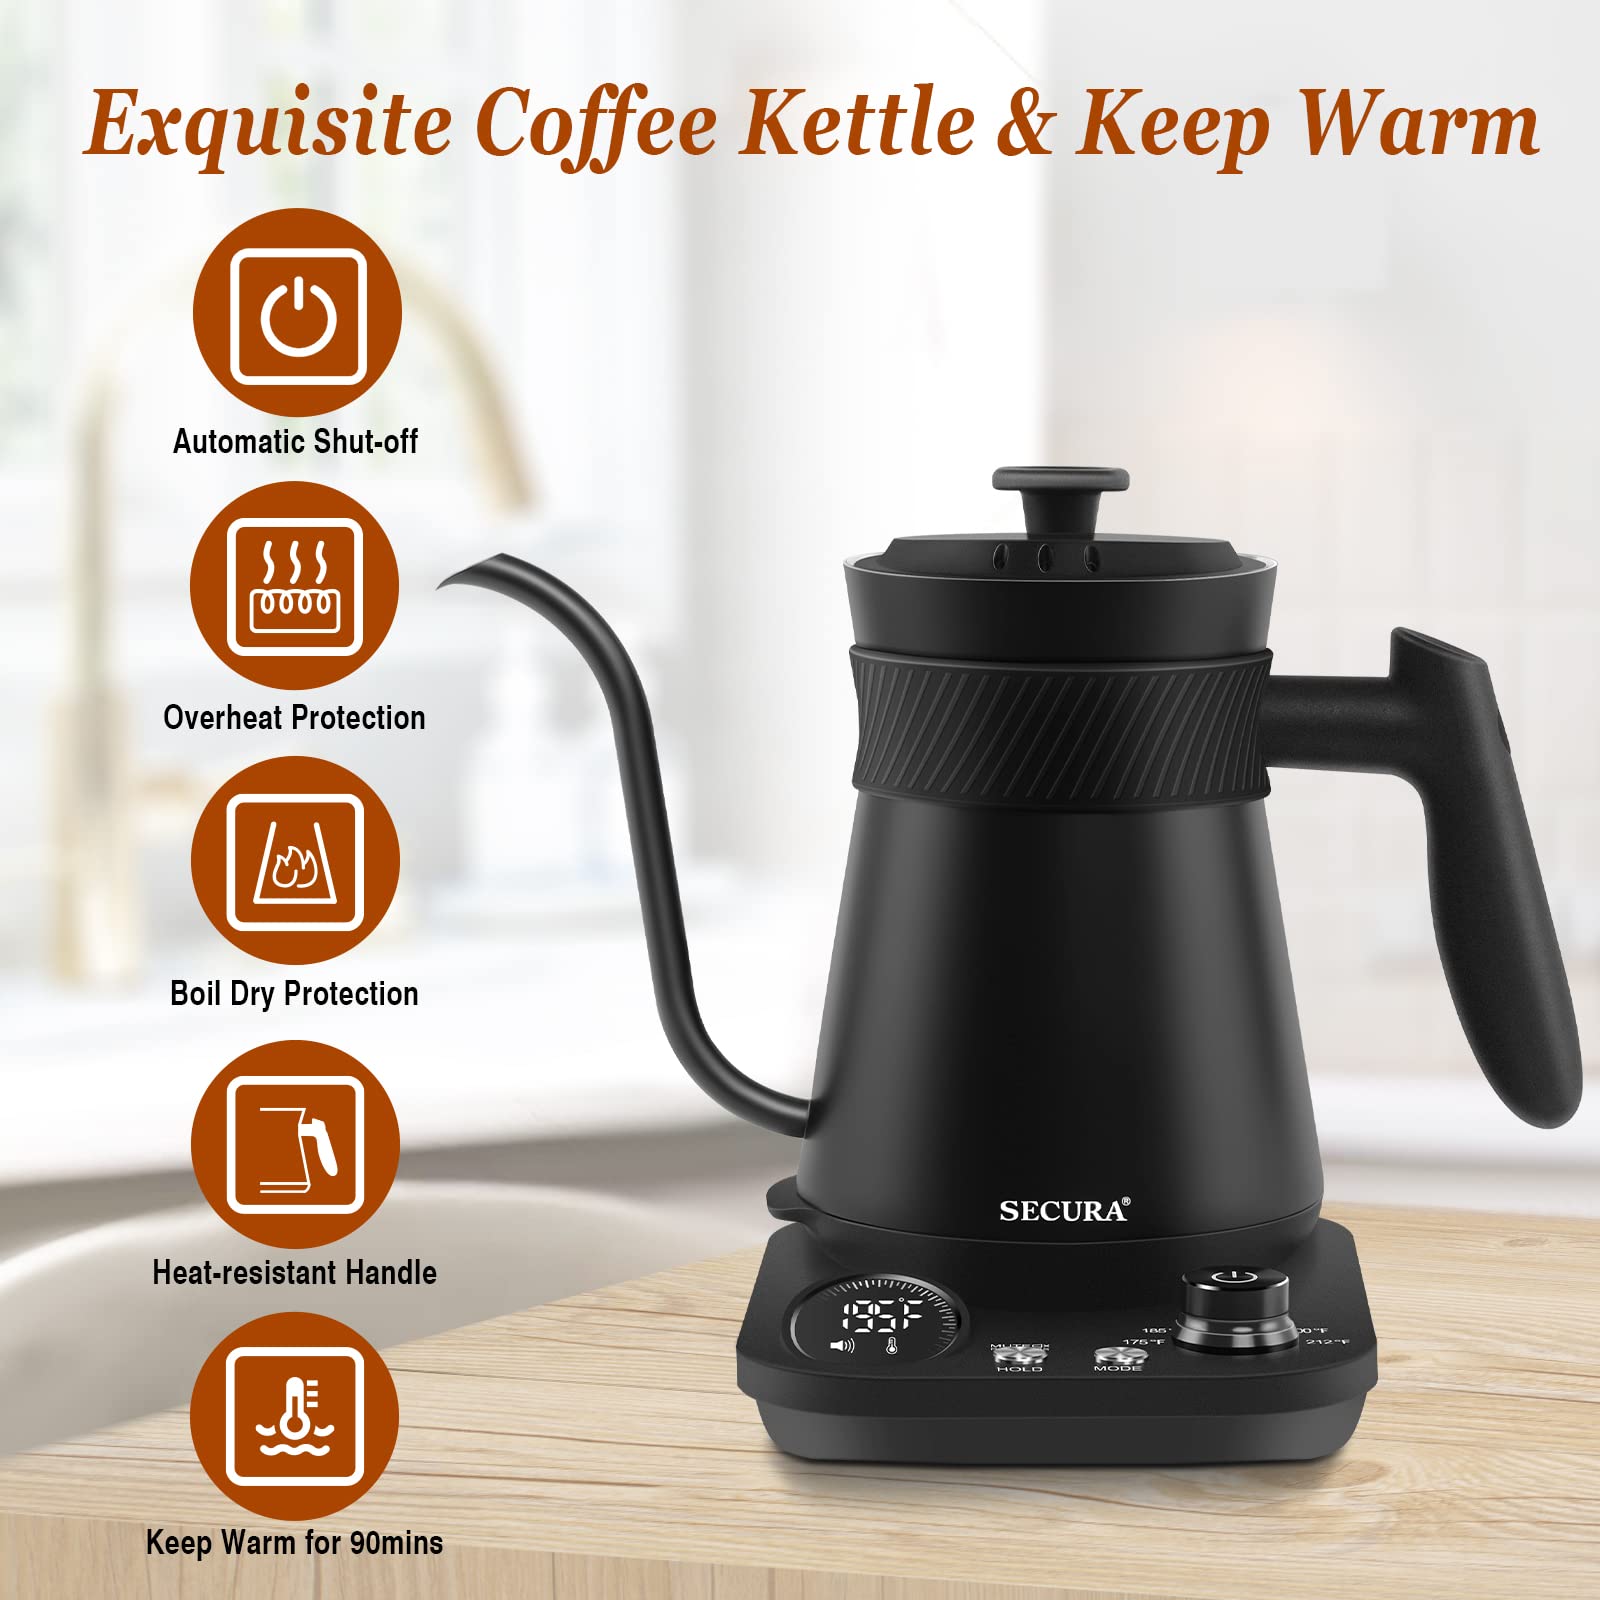 Secura Electric Gooseneck Kettle, Quick Boiling Electric Kettle with 5 Variable Presets for Coffee Tea Brewing, 100% Stainless Steel Inner Tea/Coffee Kettle with 1.5H Keep Warm,1200W-0.8L, Matt Black